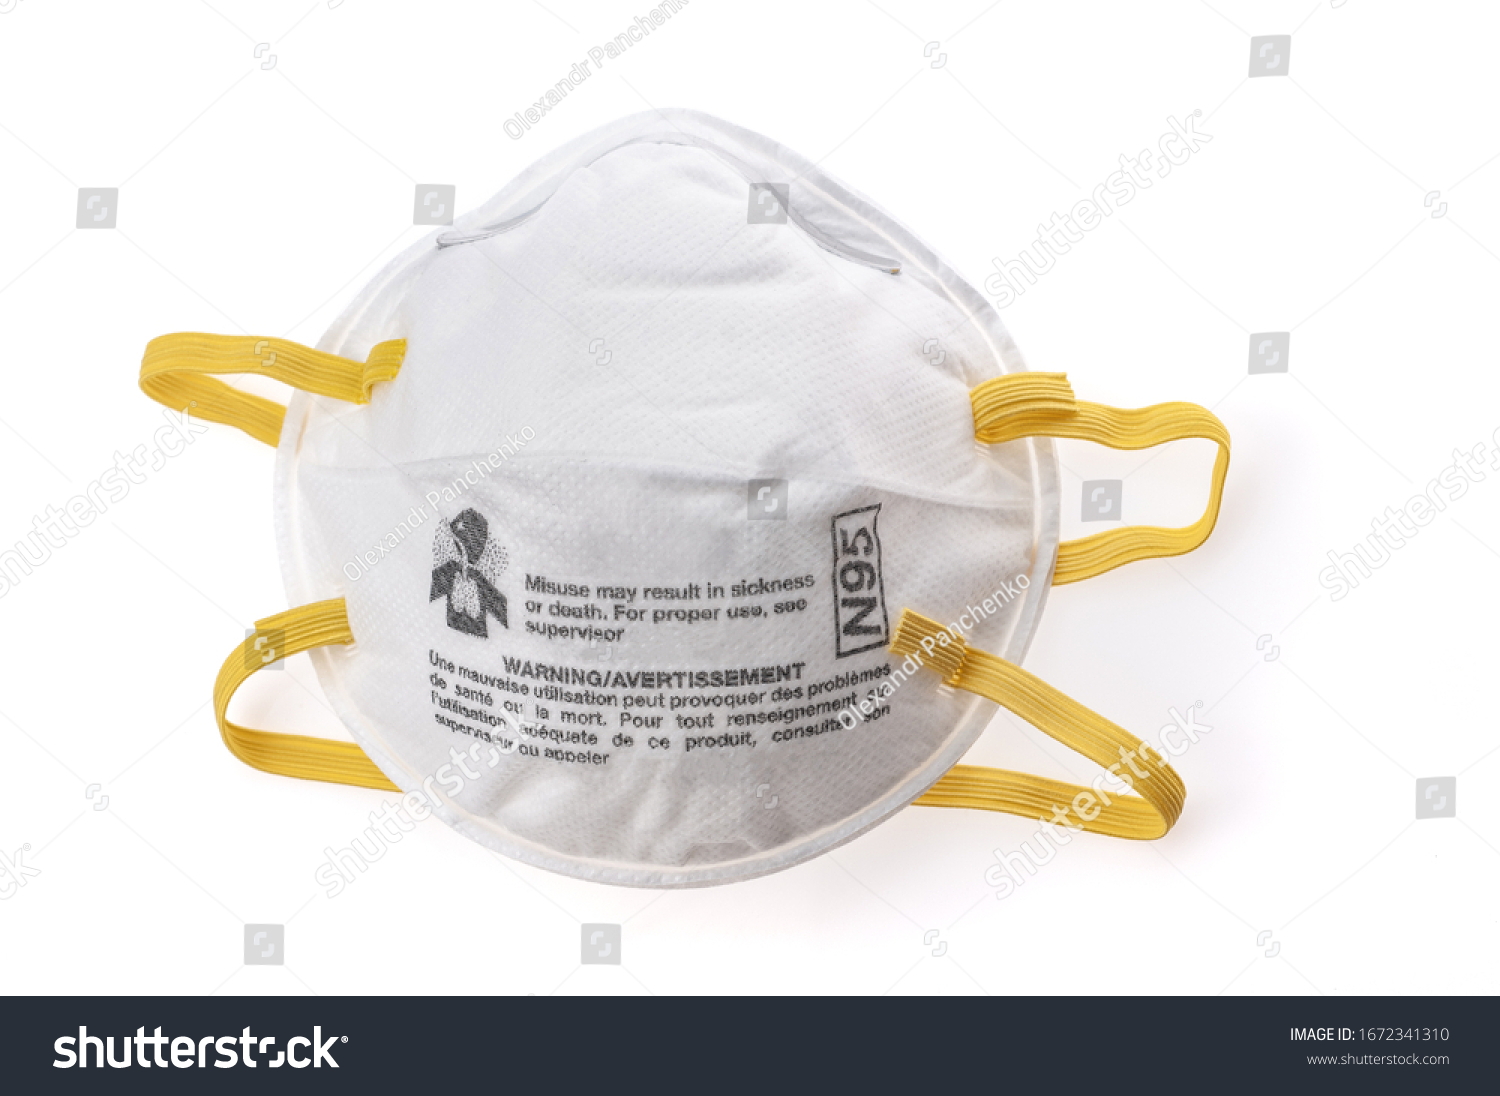 N95 Respirators and Surgical Masks (Face Masks). White medical mask isolate. Face mask protection against pollution, virus, flu and coronavirus. Health care and surgical concept. #1672341310